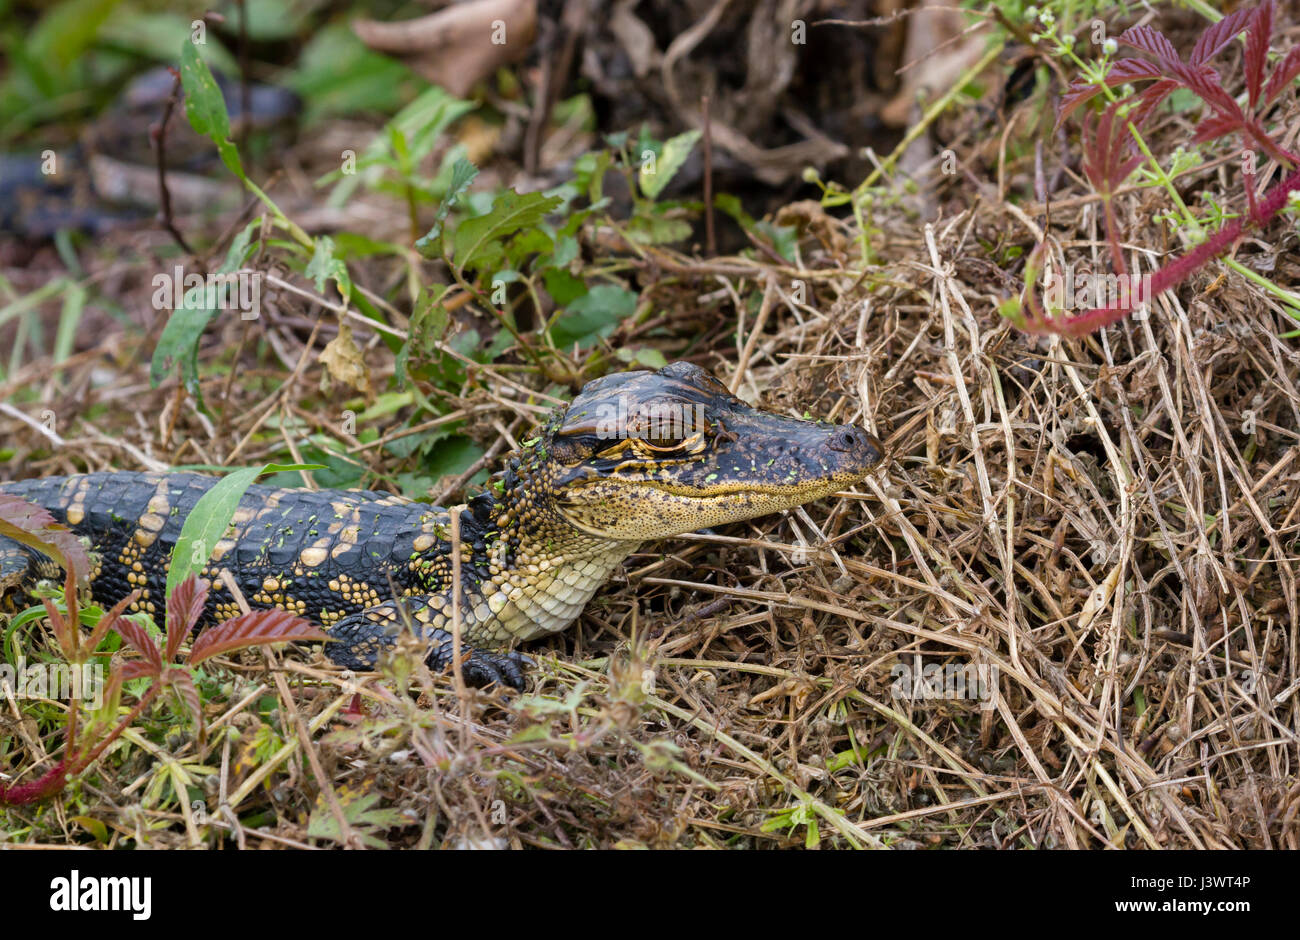 Baby american alligator at Brazos Bend State Park Stock Photo